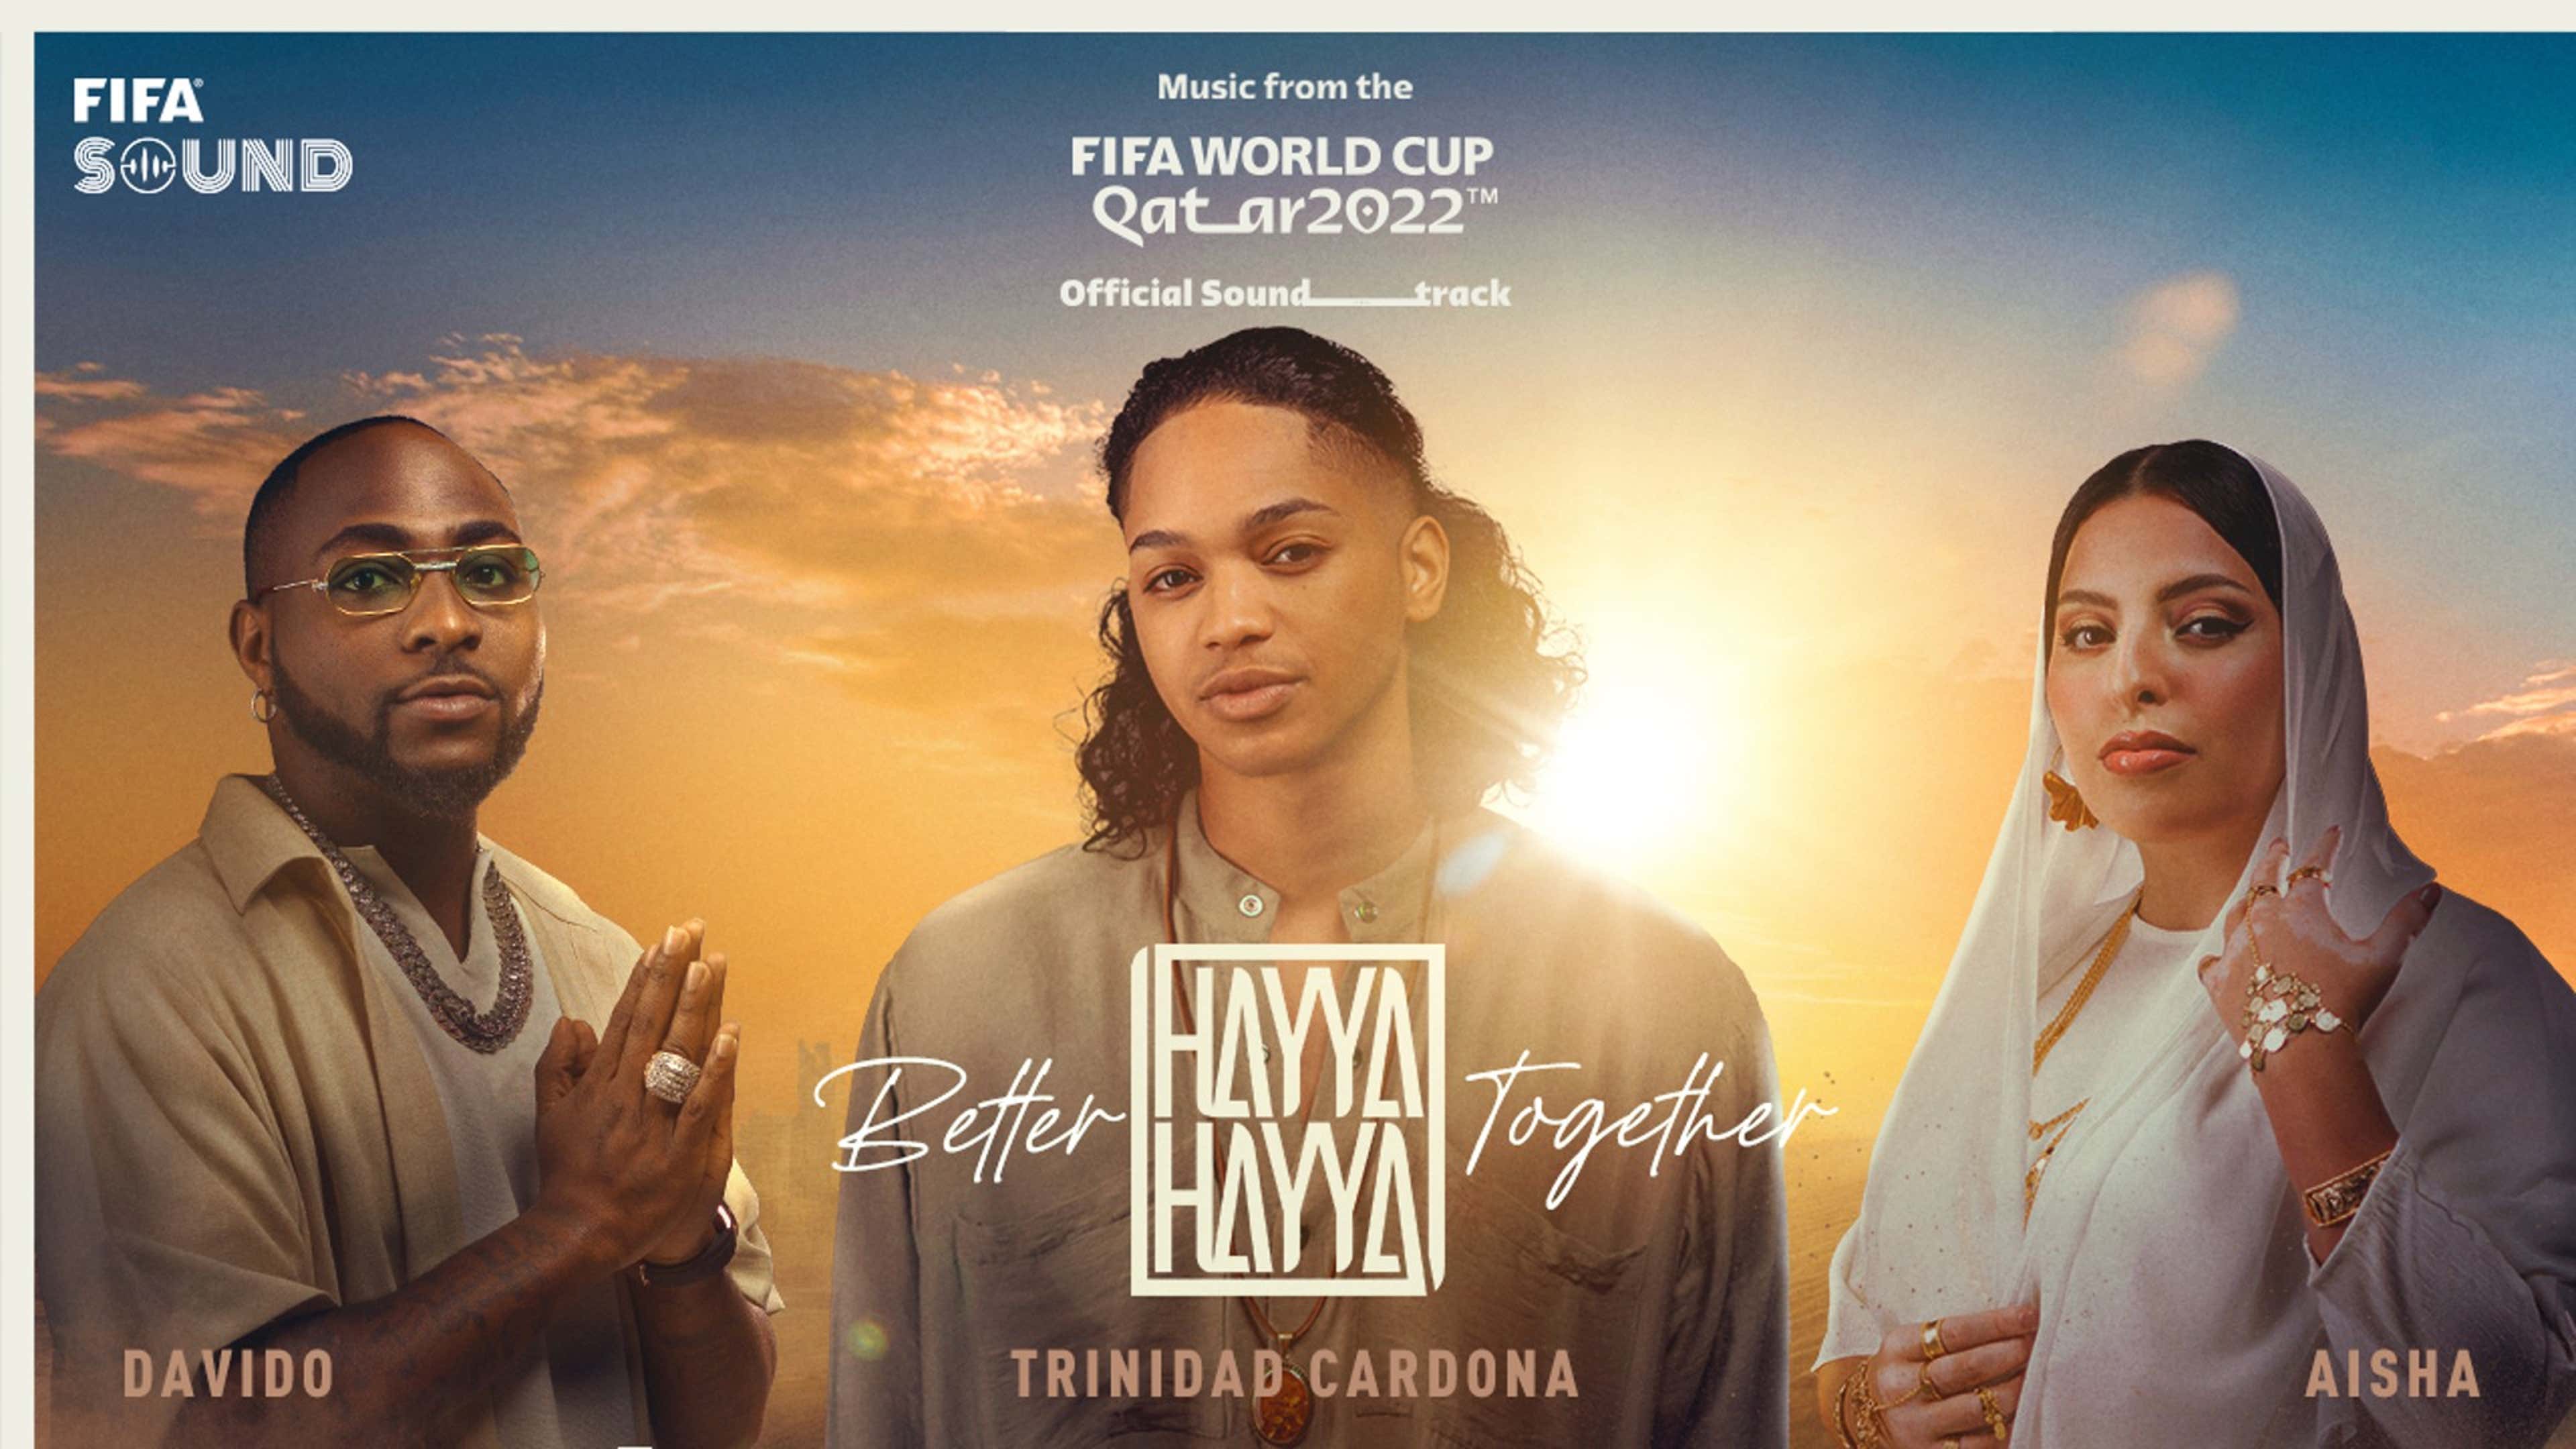 FIFA World Cup 2022 posters launched